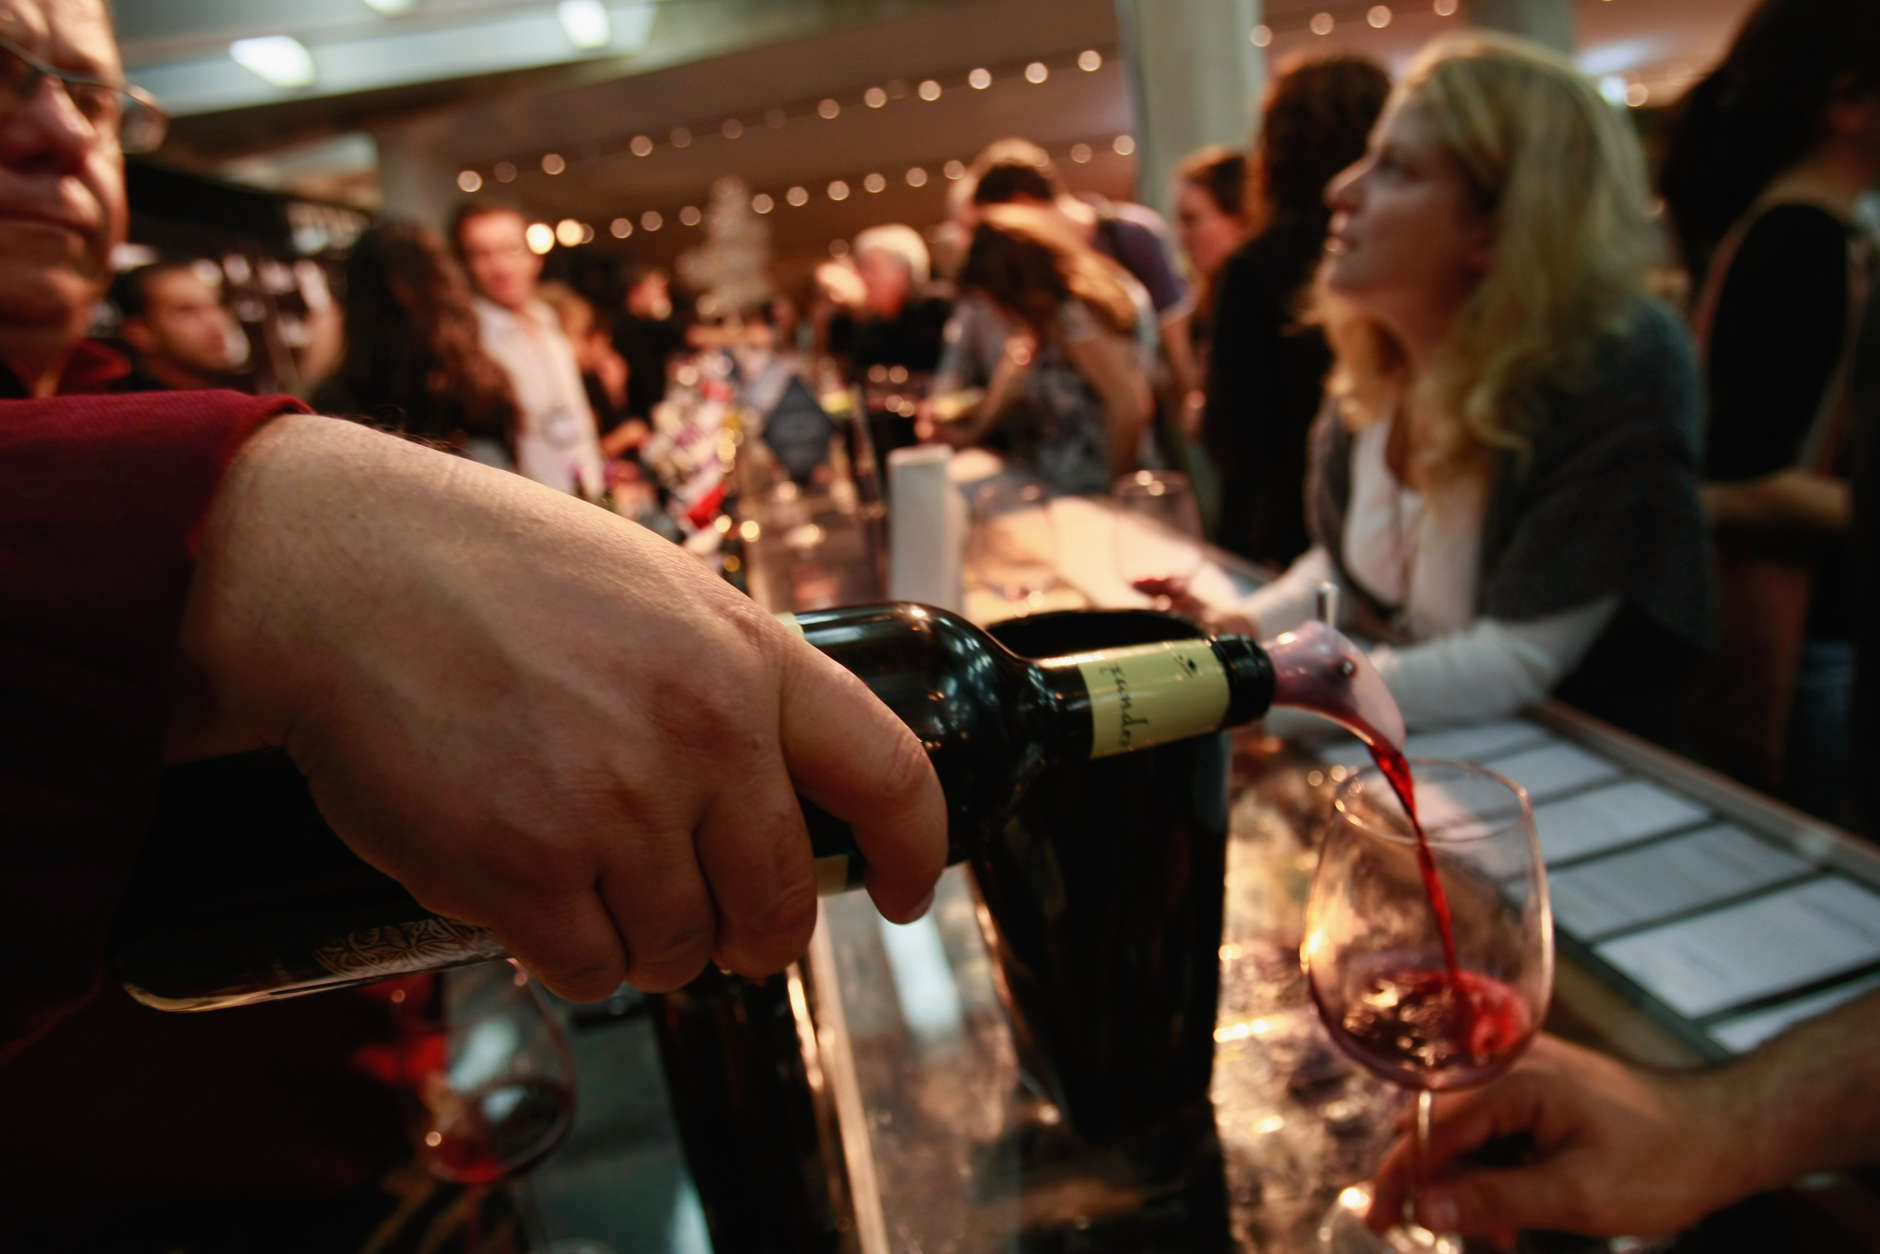 Today, many restaurants throughout the DMV allow patrons to bring wines into their establishments. Of course, there are a few rules — known as corkage policies — that apply, as well as a few etiquette guidelines that should be followed. (Getty Images)